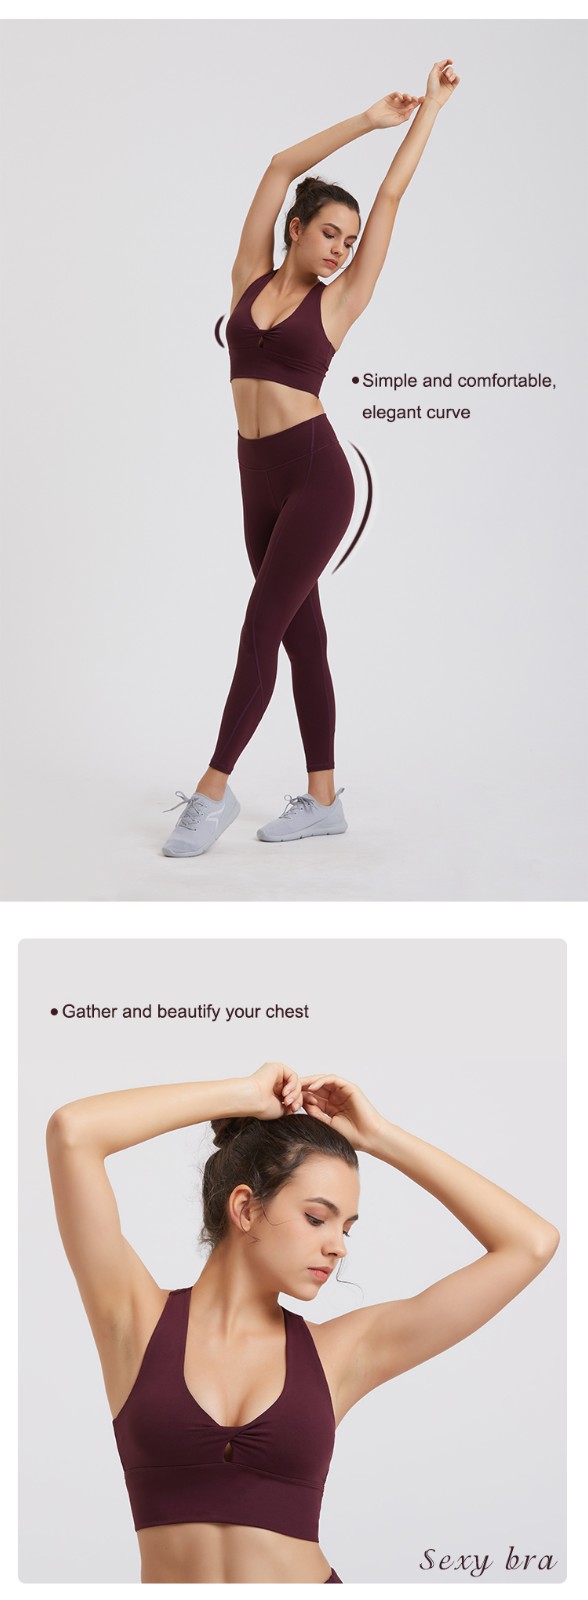 INGOR high quality stylish yoga outfits overseas market for ladies-4